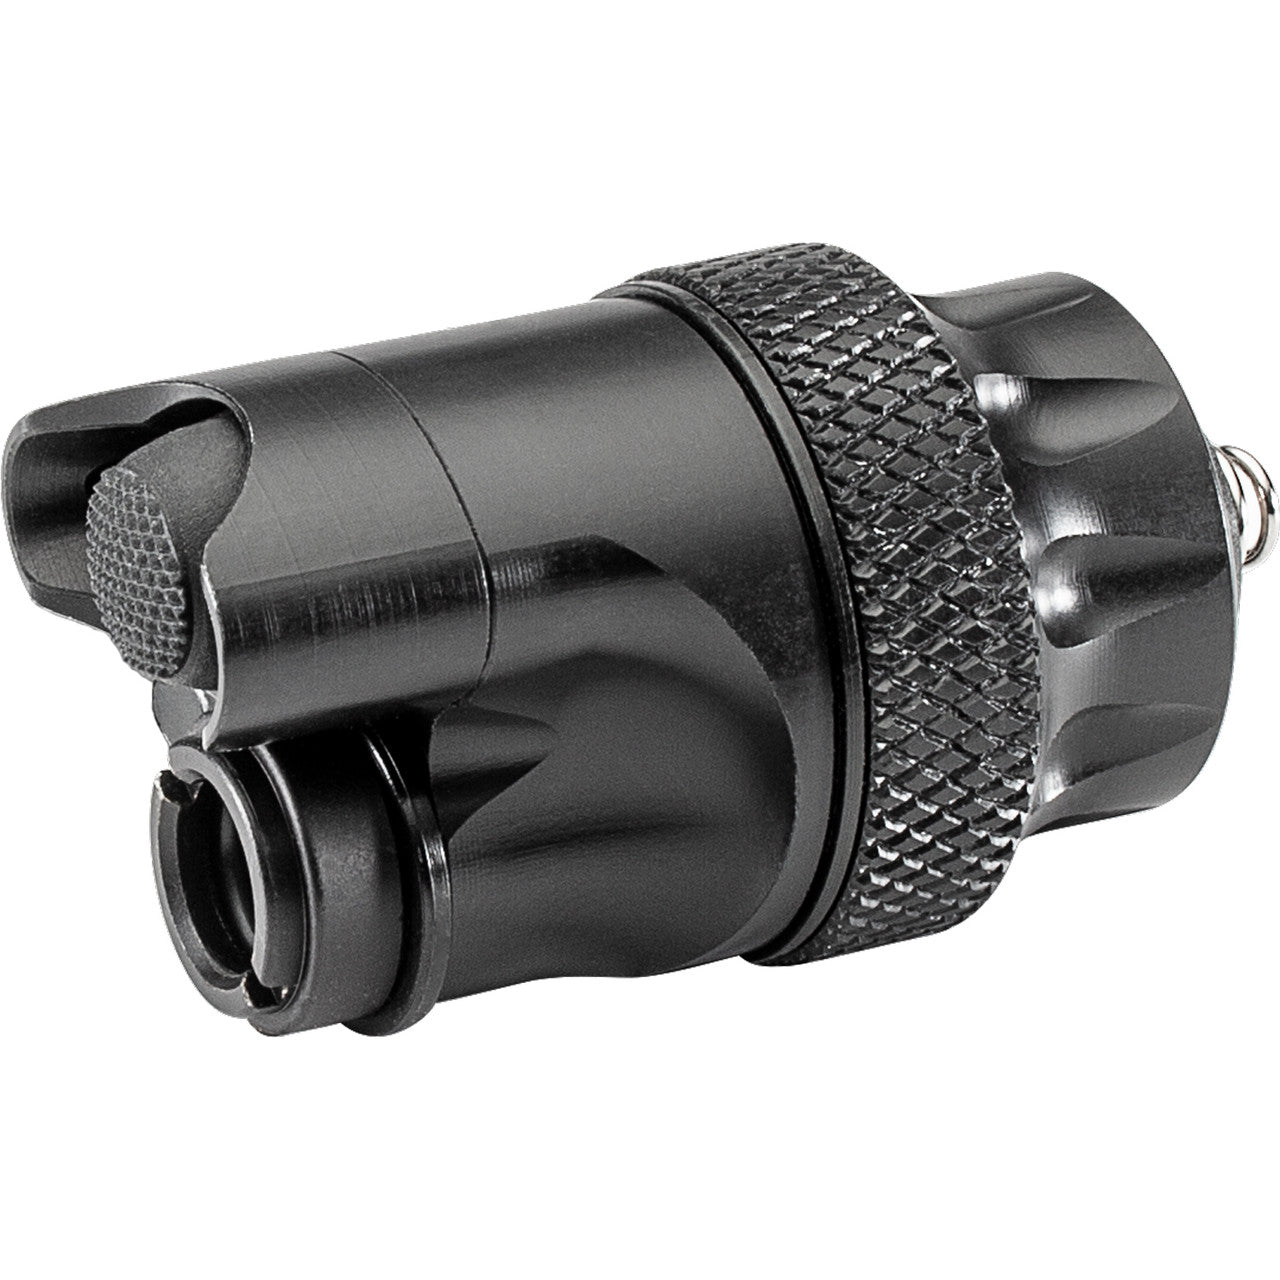 SureFire DS00 Waterproof Switch Assembly for Scout Light WeaponLights